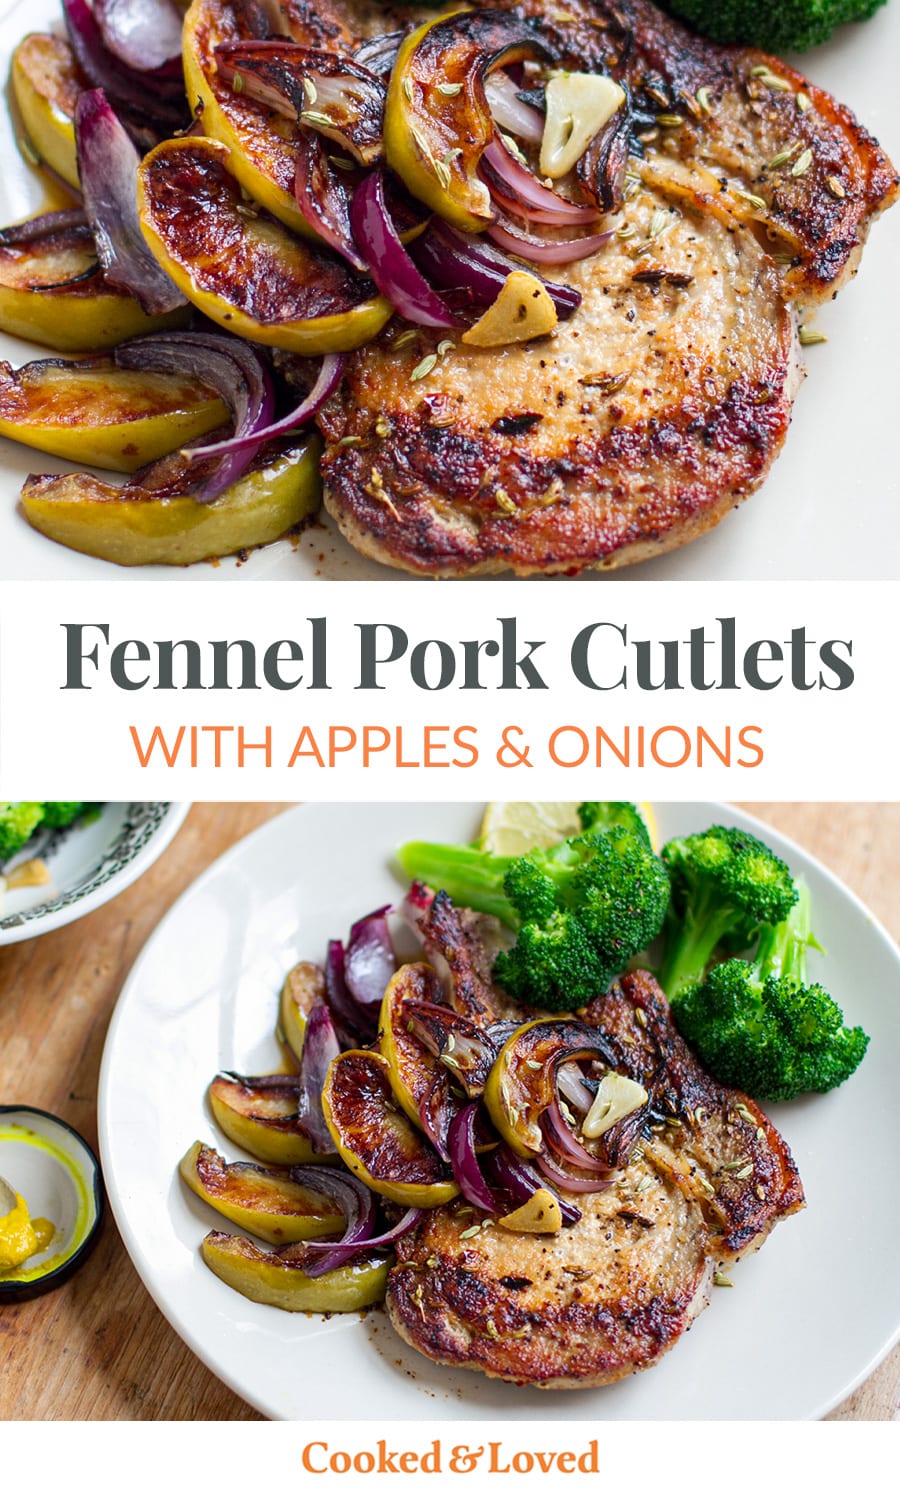 Pork Cutlets Recipe With Fennel, Roasted Apples & Onions